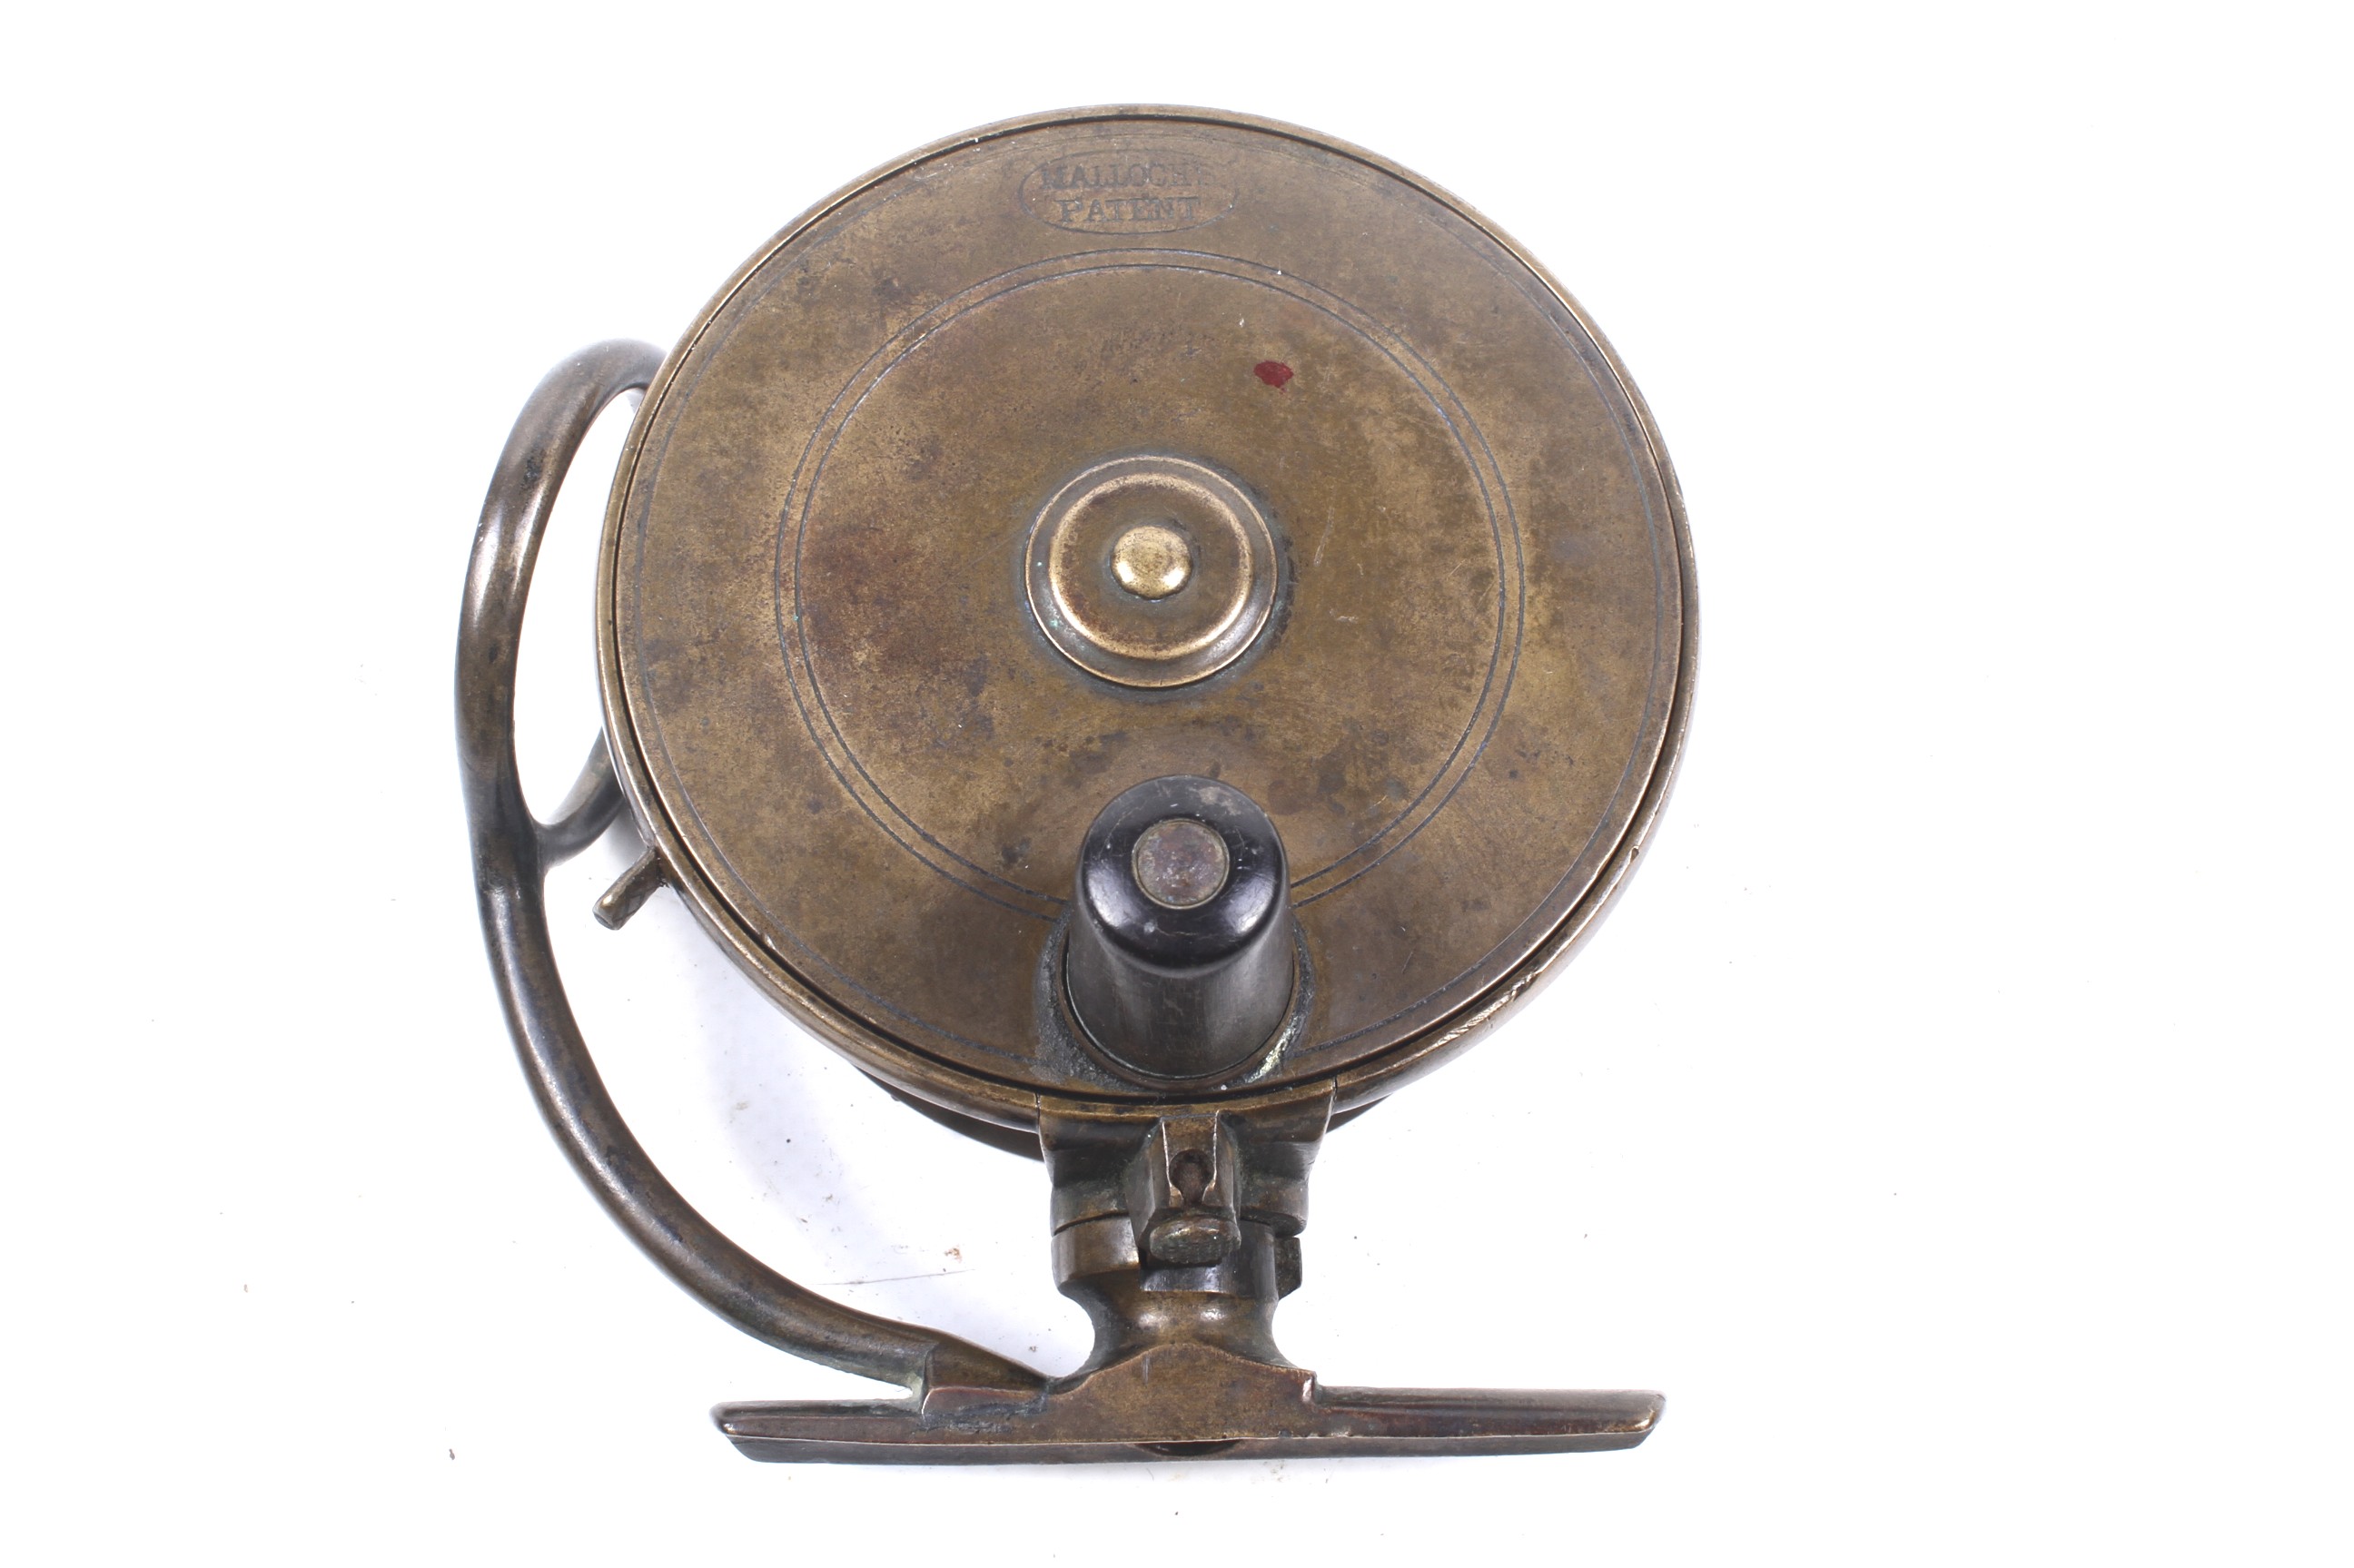 A vintage Malloch's of Perth 4" side casting salmon fishing reel.